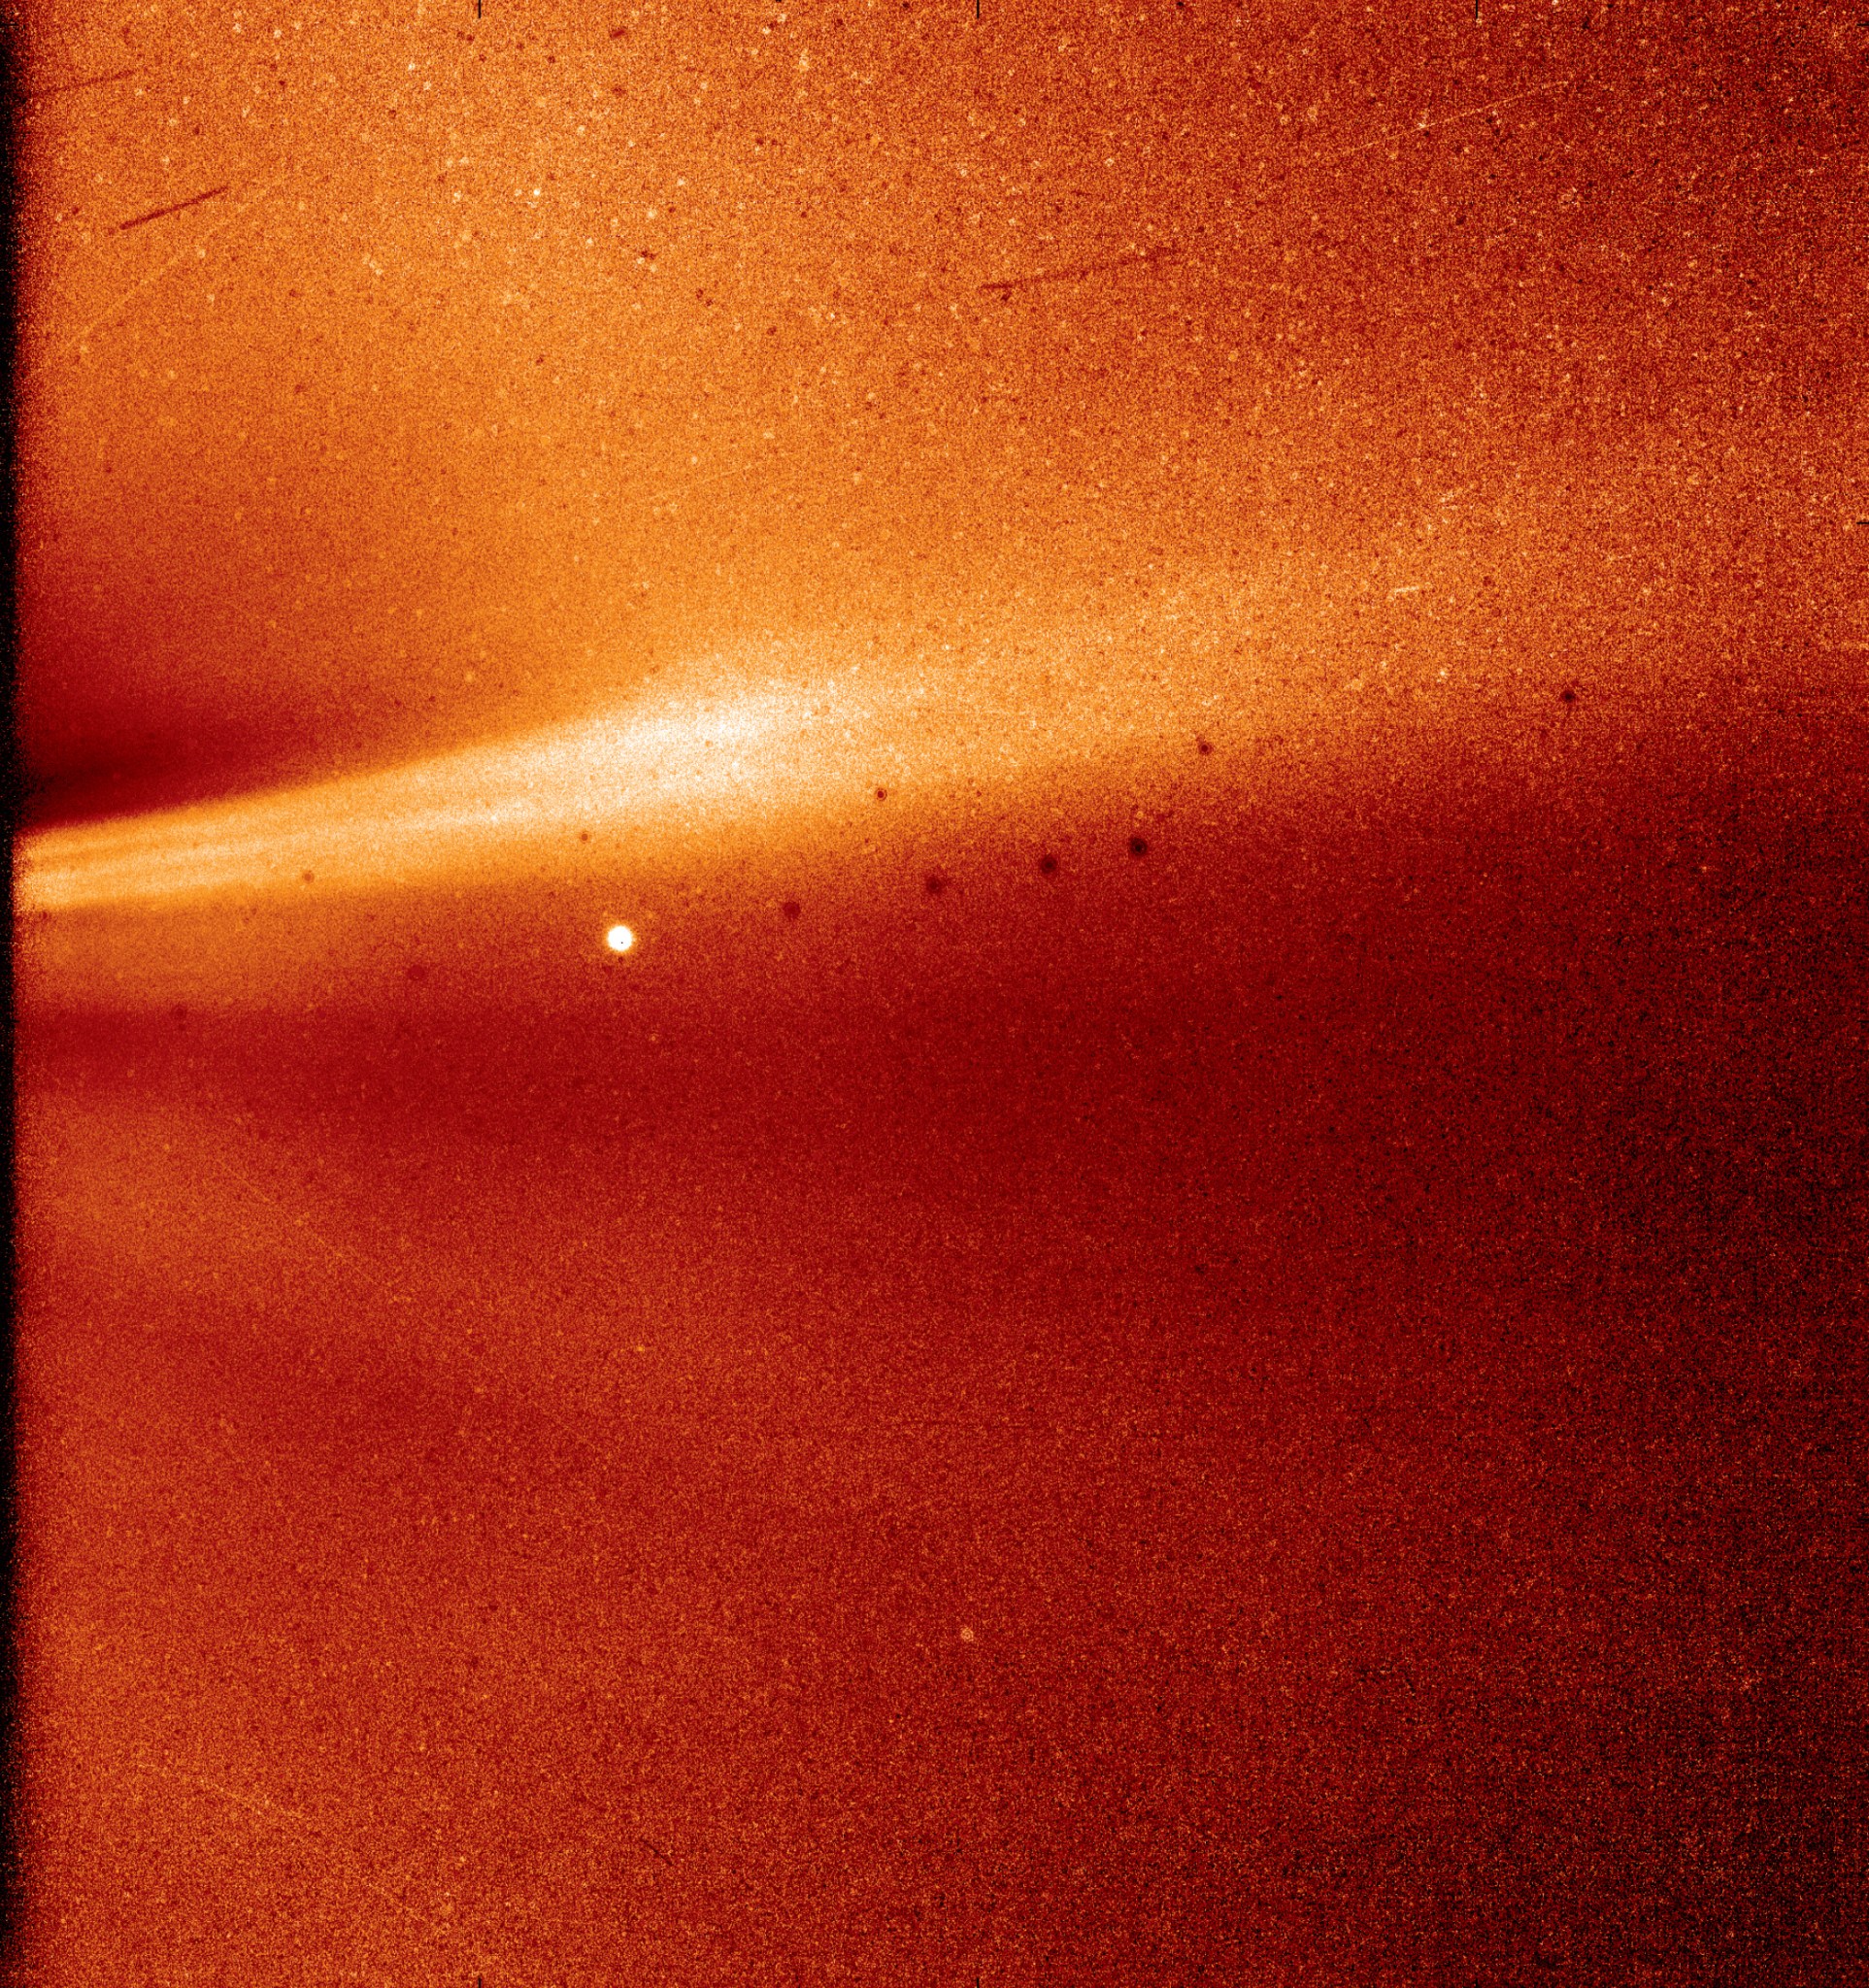 Parker Solar Probe image of coronal streamer. The image is dark orange, with a beam of lighter yellow streaking across it.